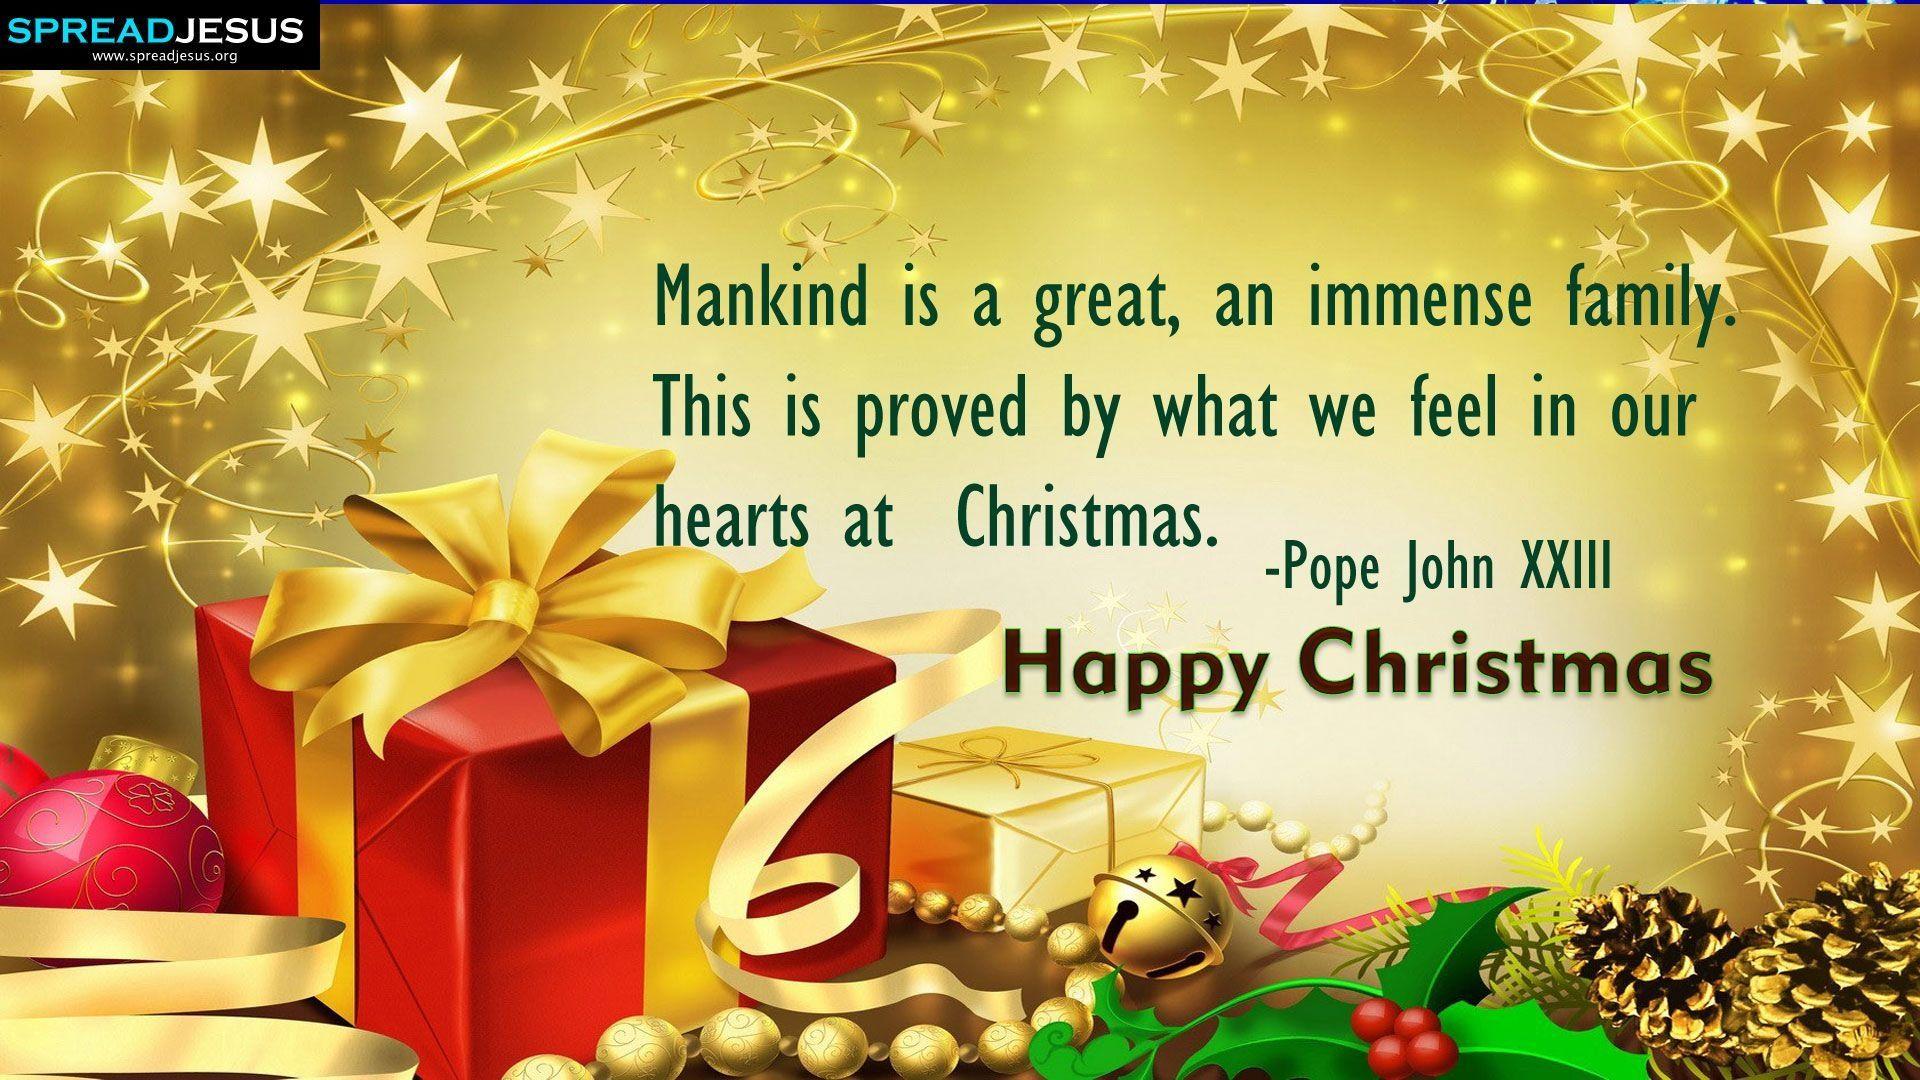 Merry Christmas Image With Quotes Download